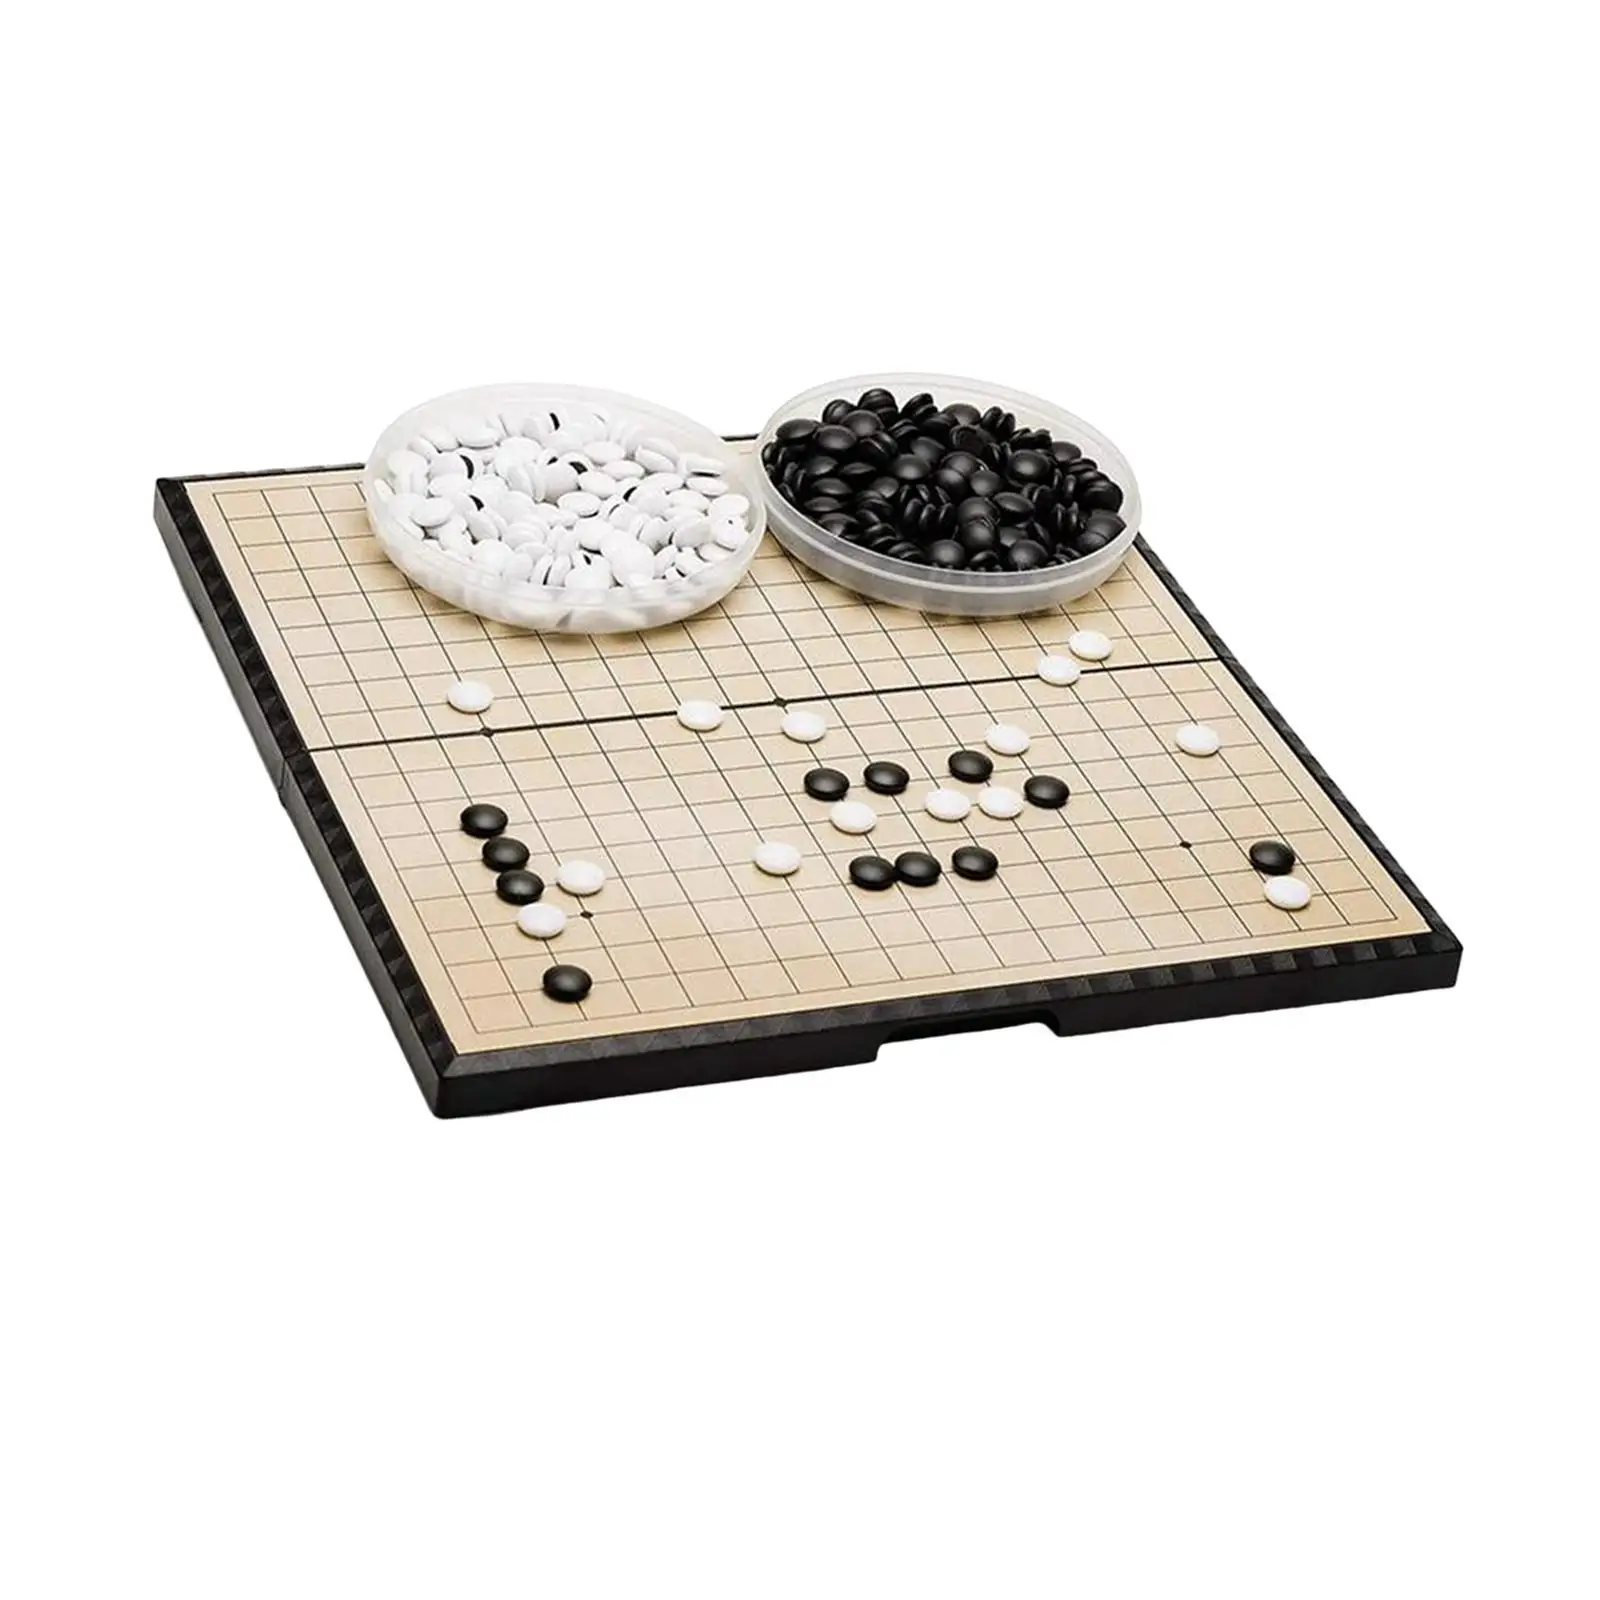 Traditional Magnetic Gone Game KIt Chess Board Magnetic Convex Stone Durable for Family Children Travel Game Educational Toy